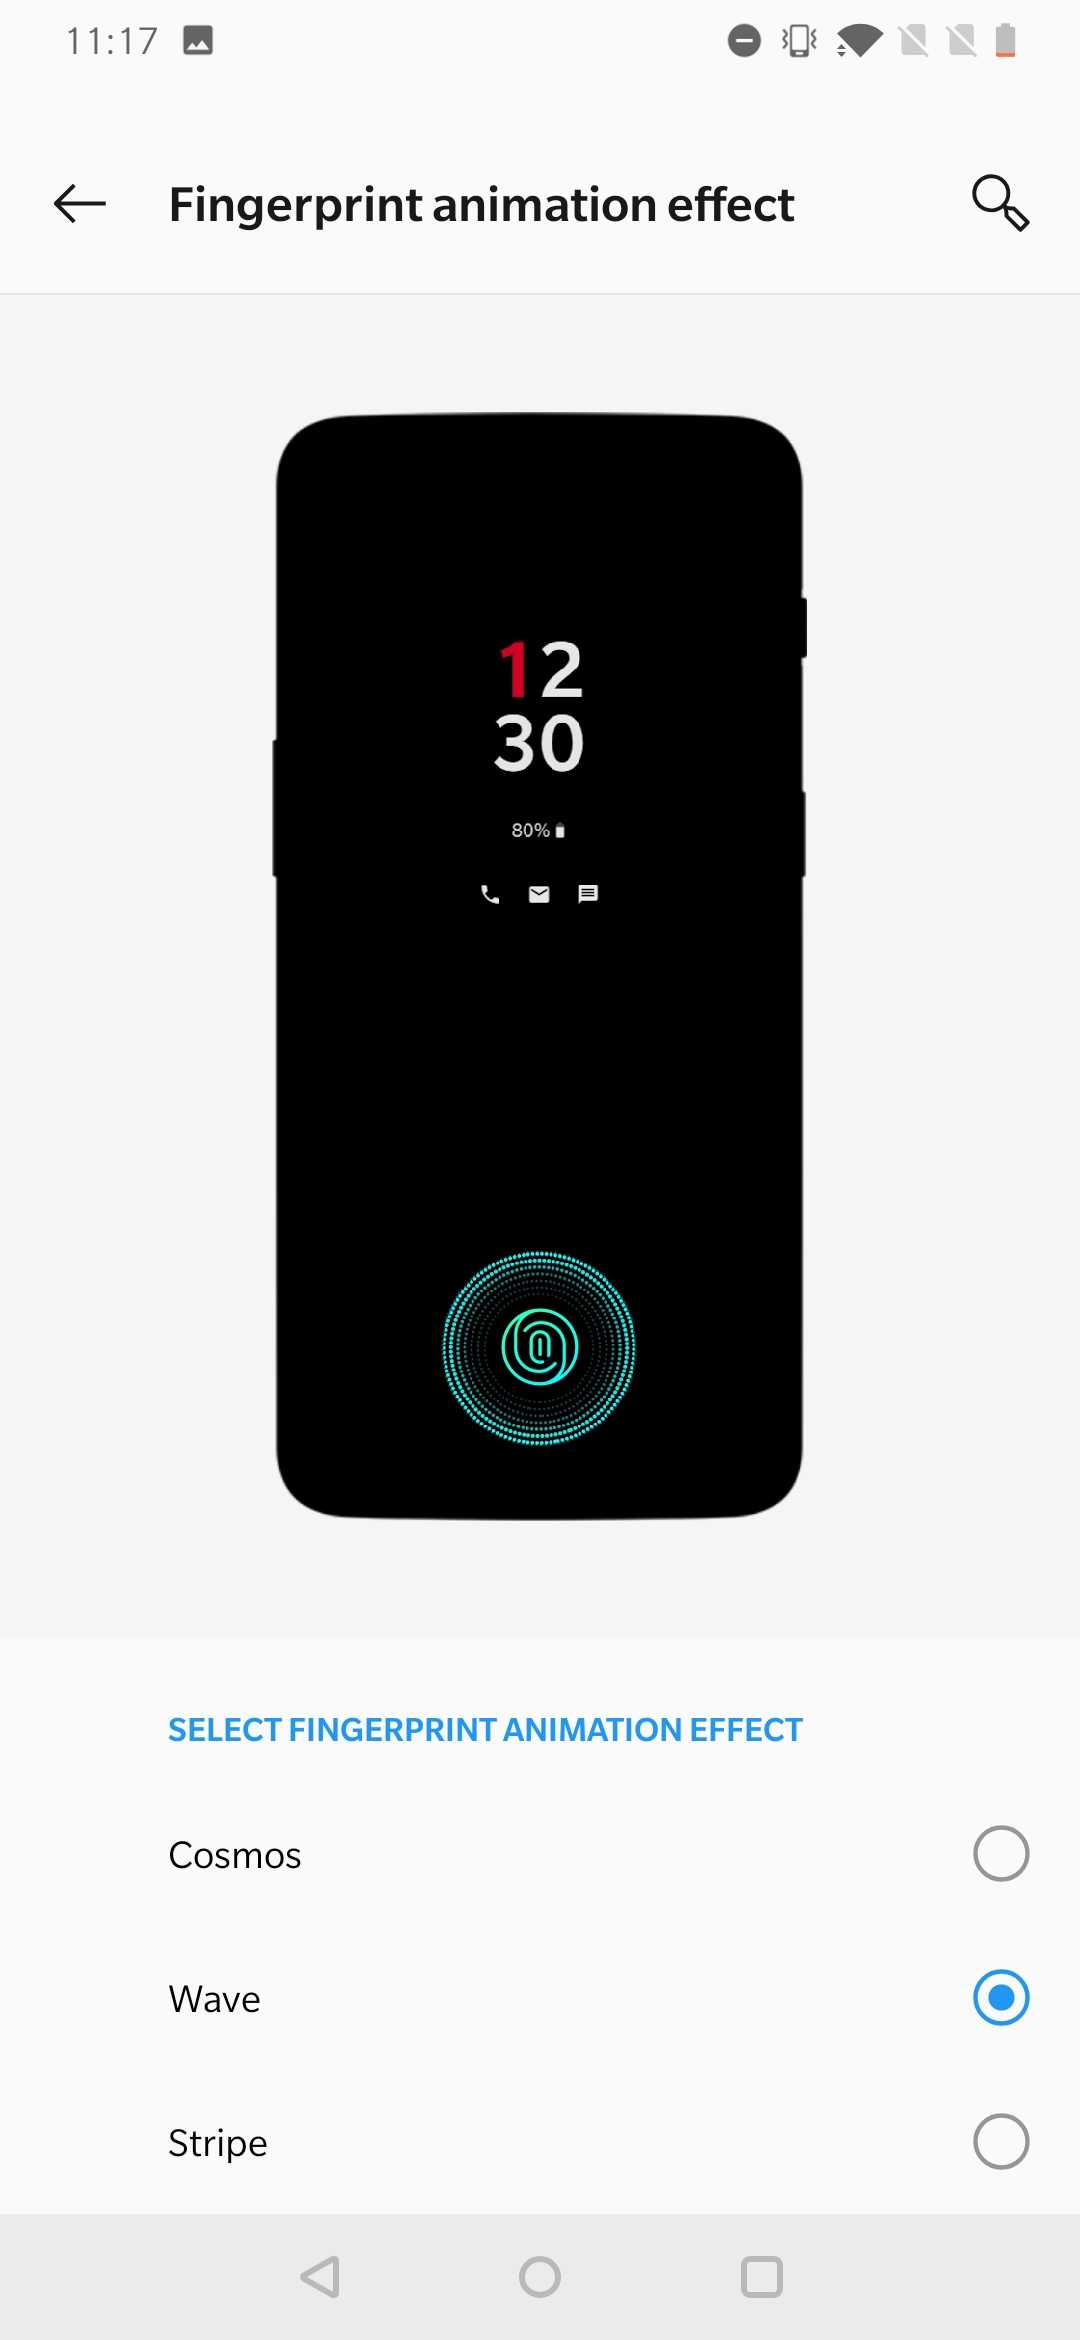 A fingerprint animation for the OnePlus 6T.